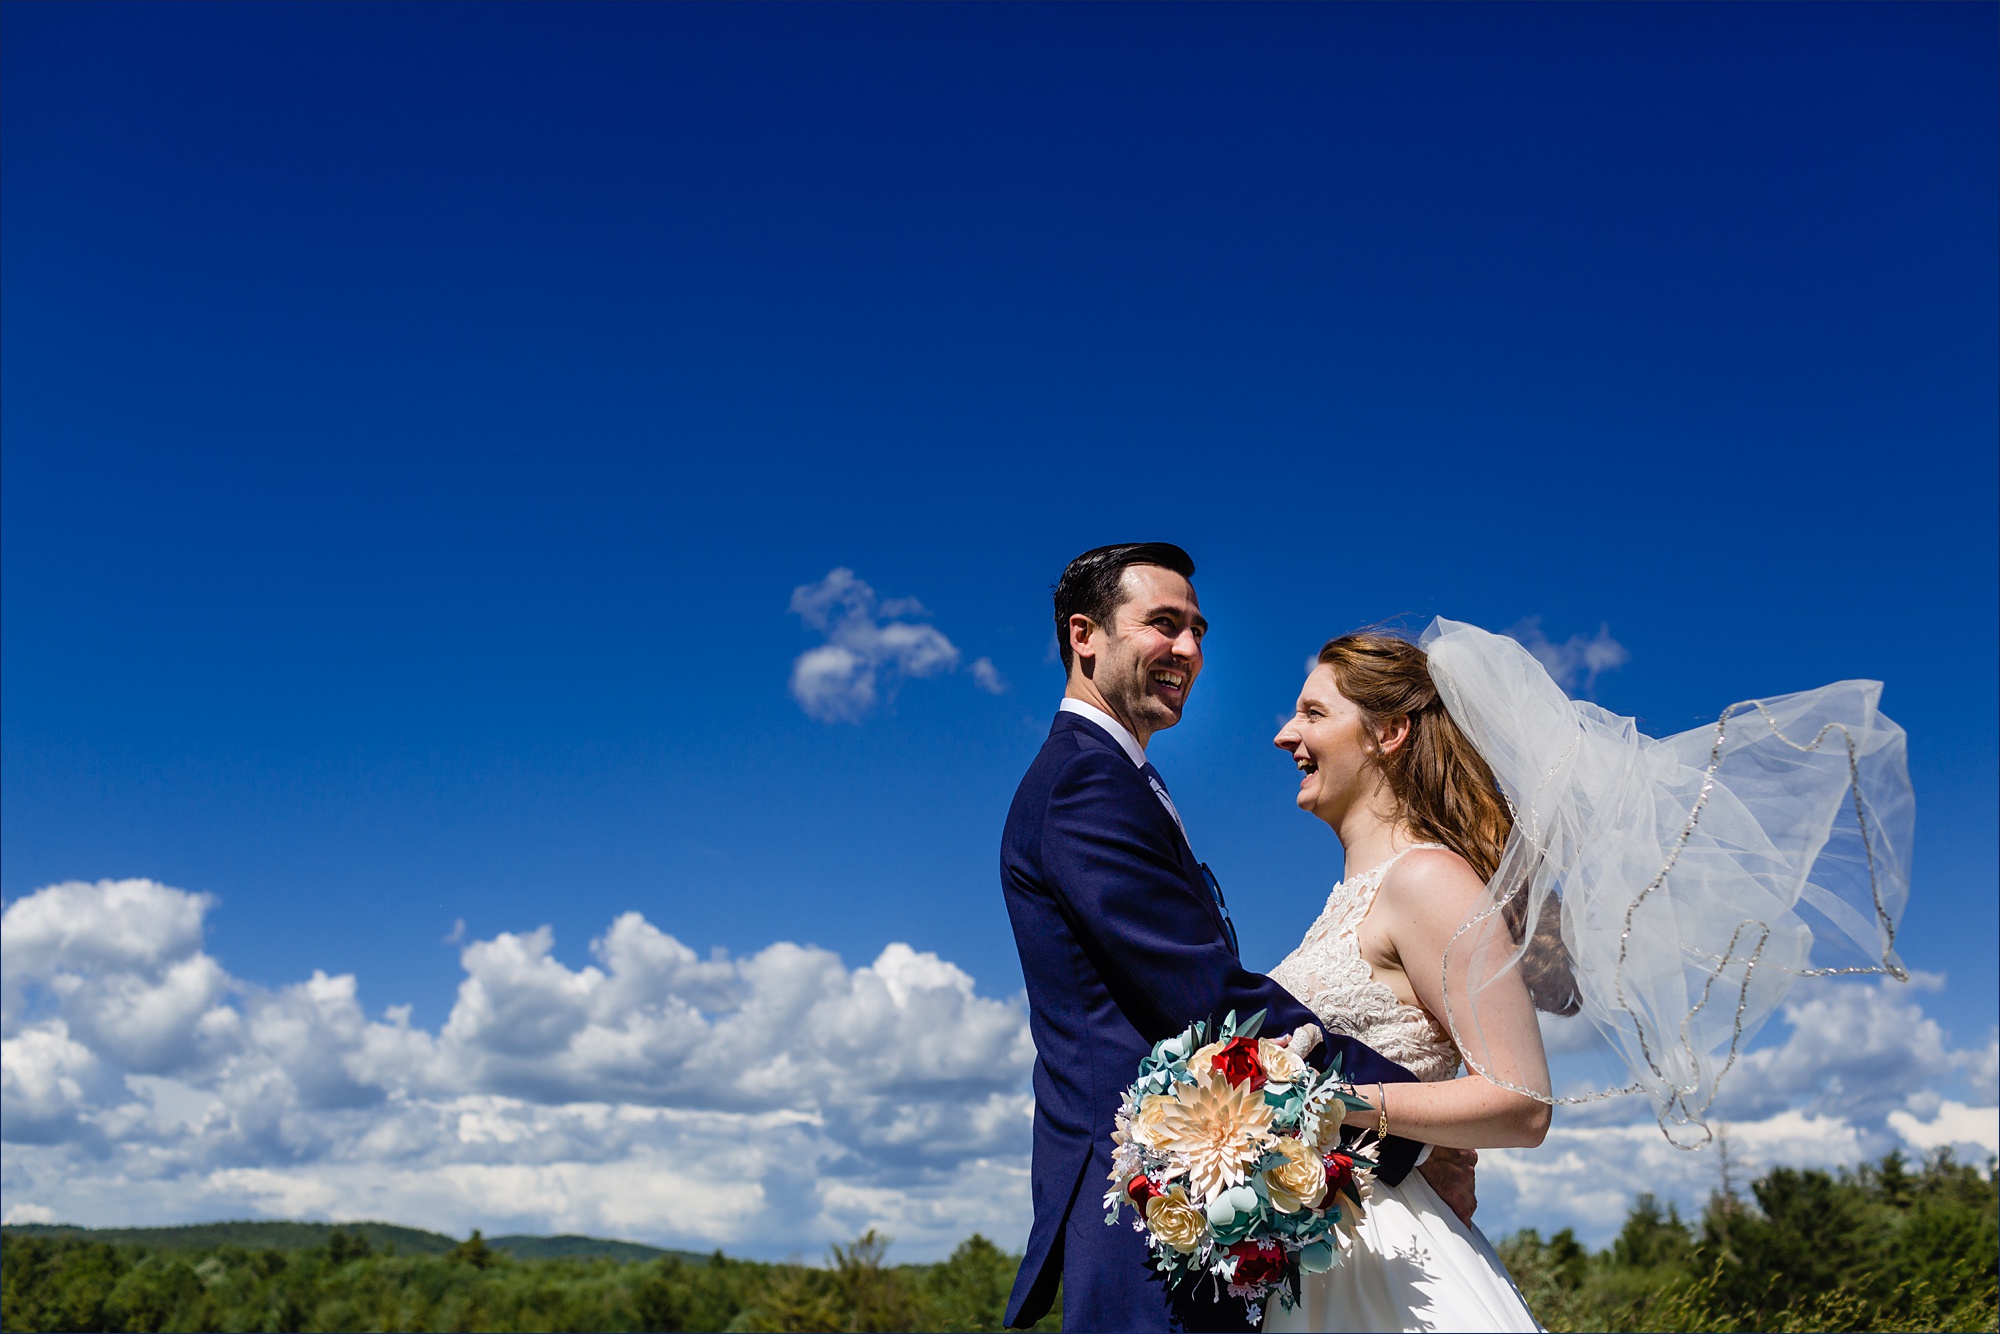 The bride and groom stand close together under a bright blue sky after their NH wedding 